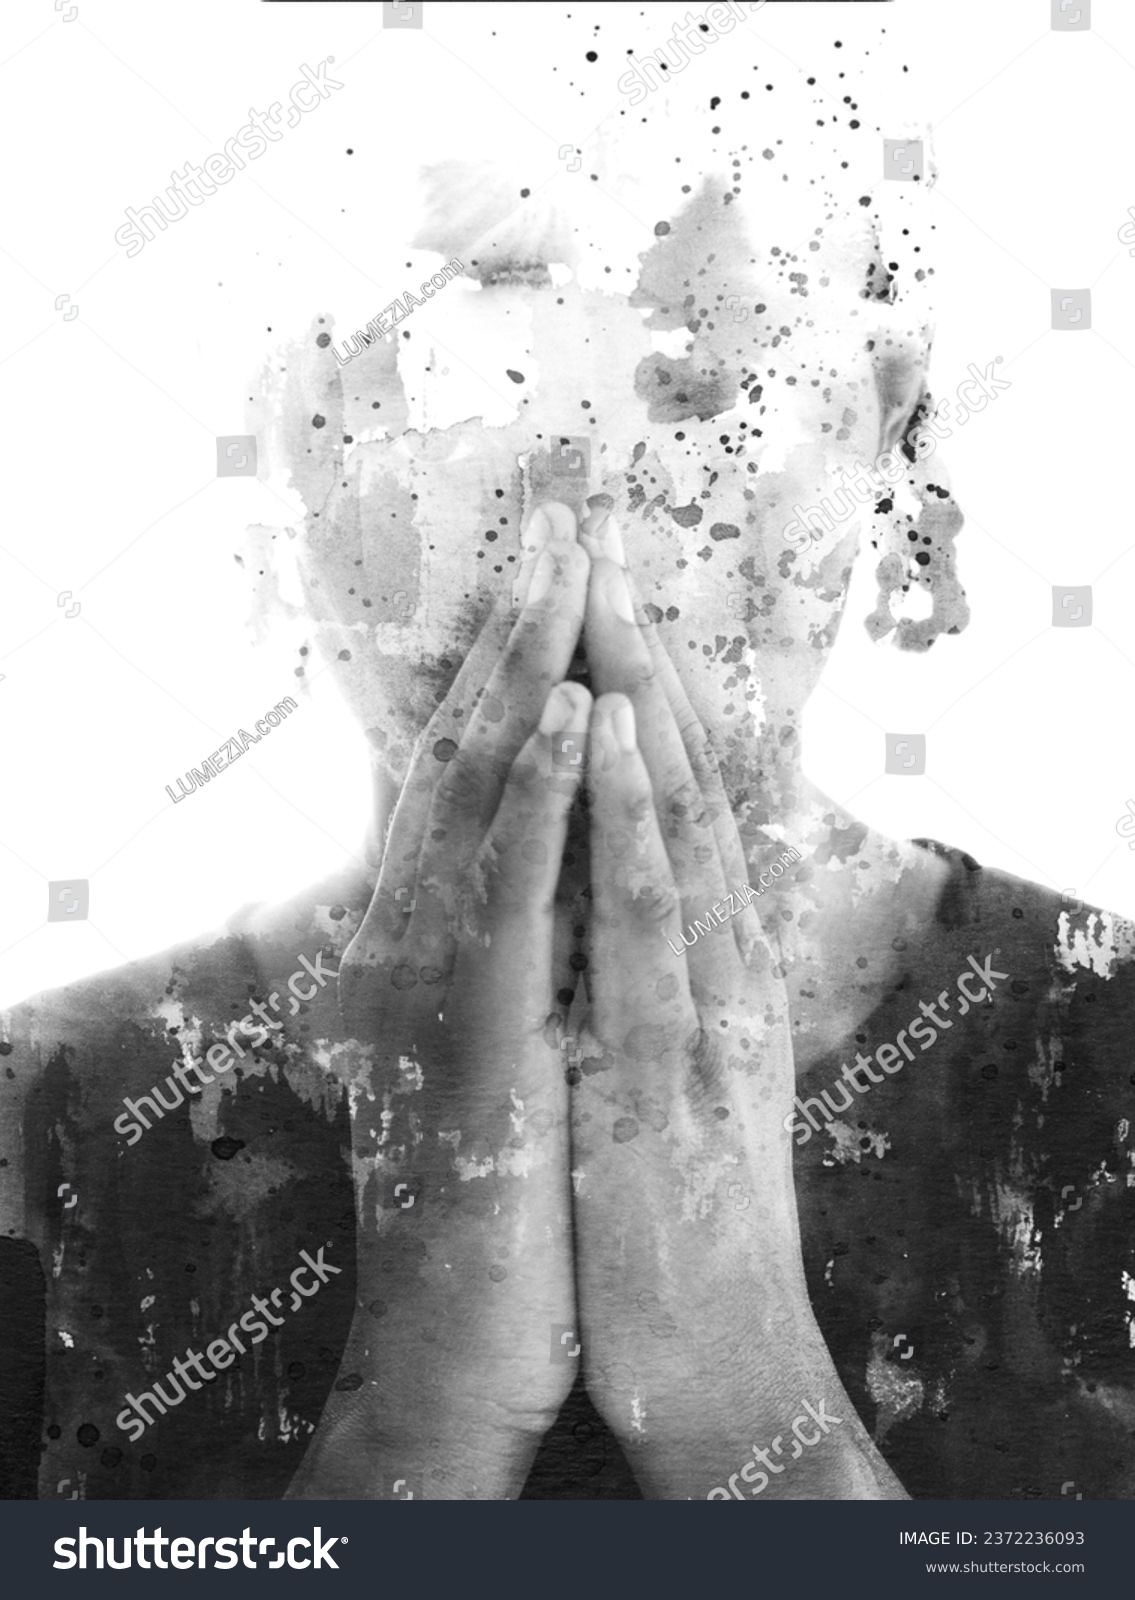 A conceptual paintography portrait disappearing into white background #2372236093